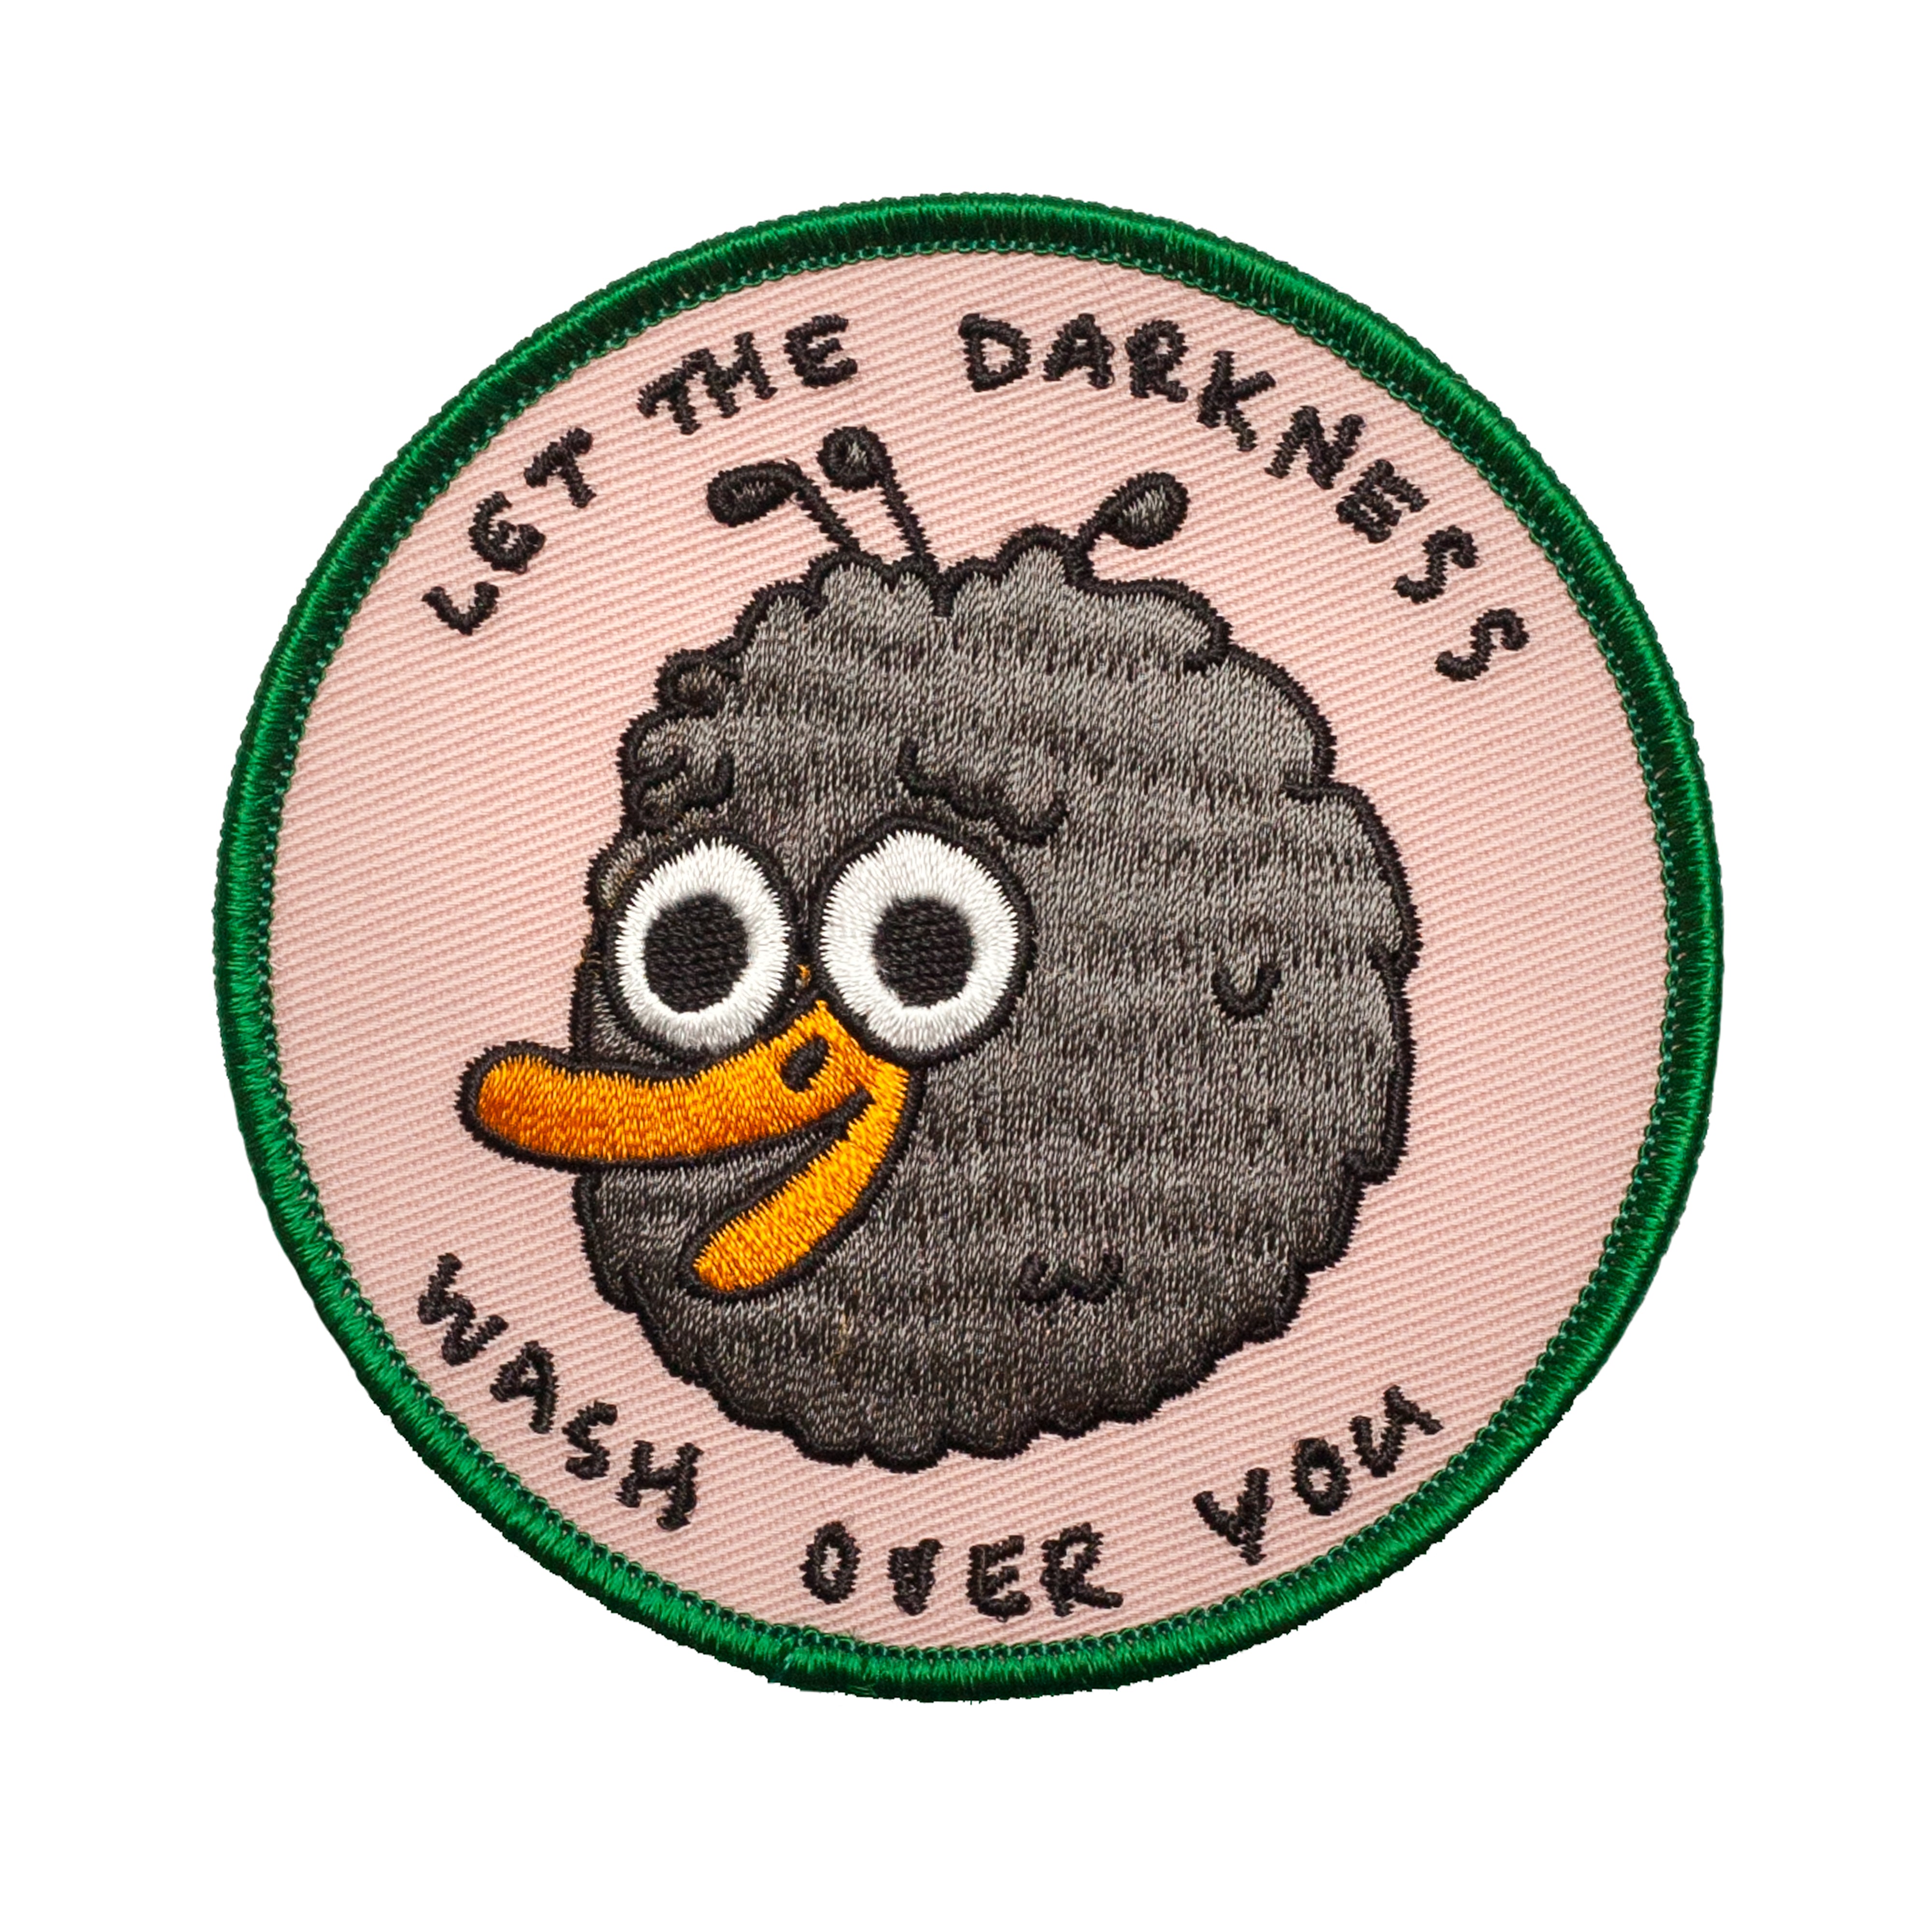 Darkness Lives In Me - Goth Patches - Iron On Patch Style Poster